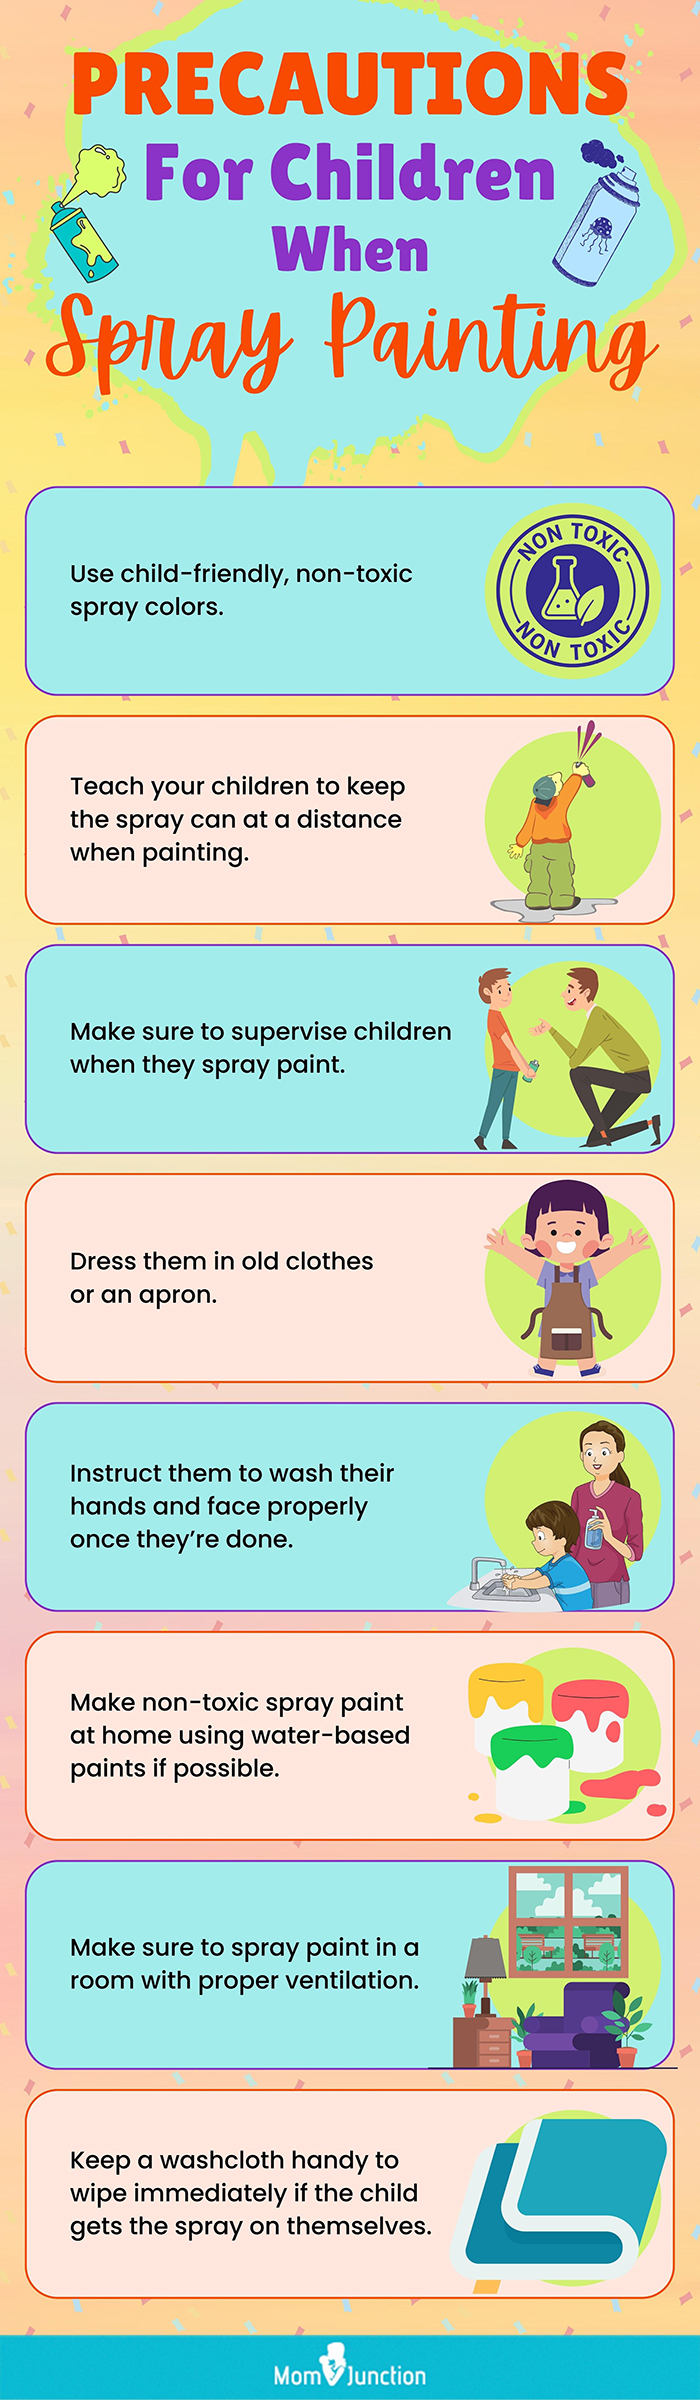 precautions for children when spray painting (infographic)